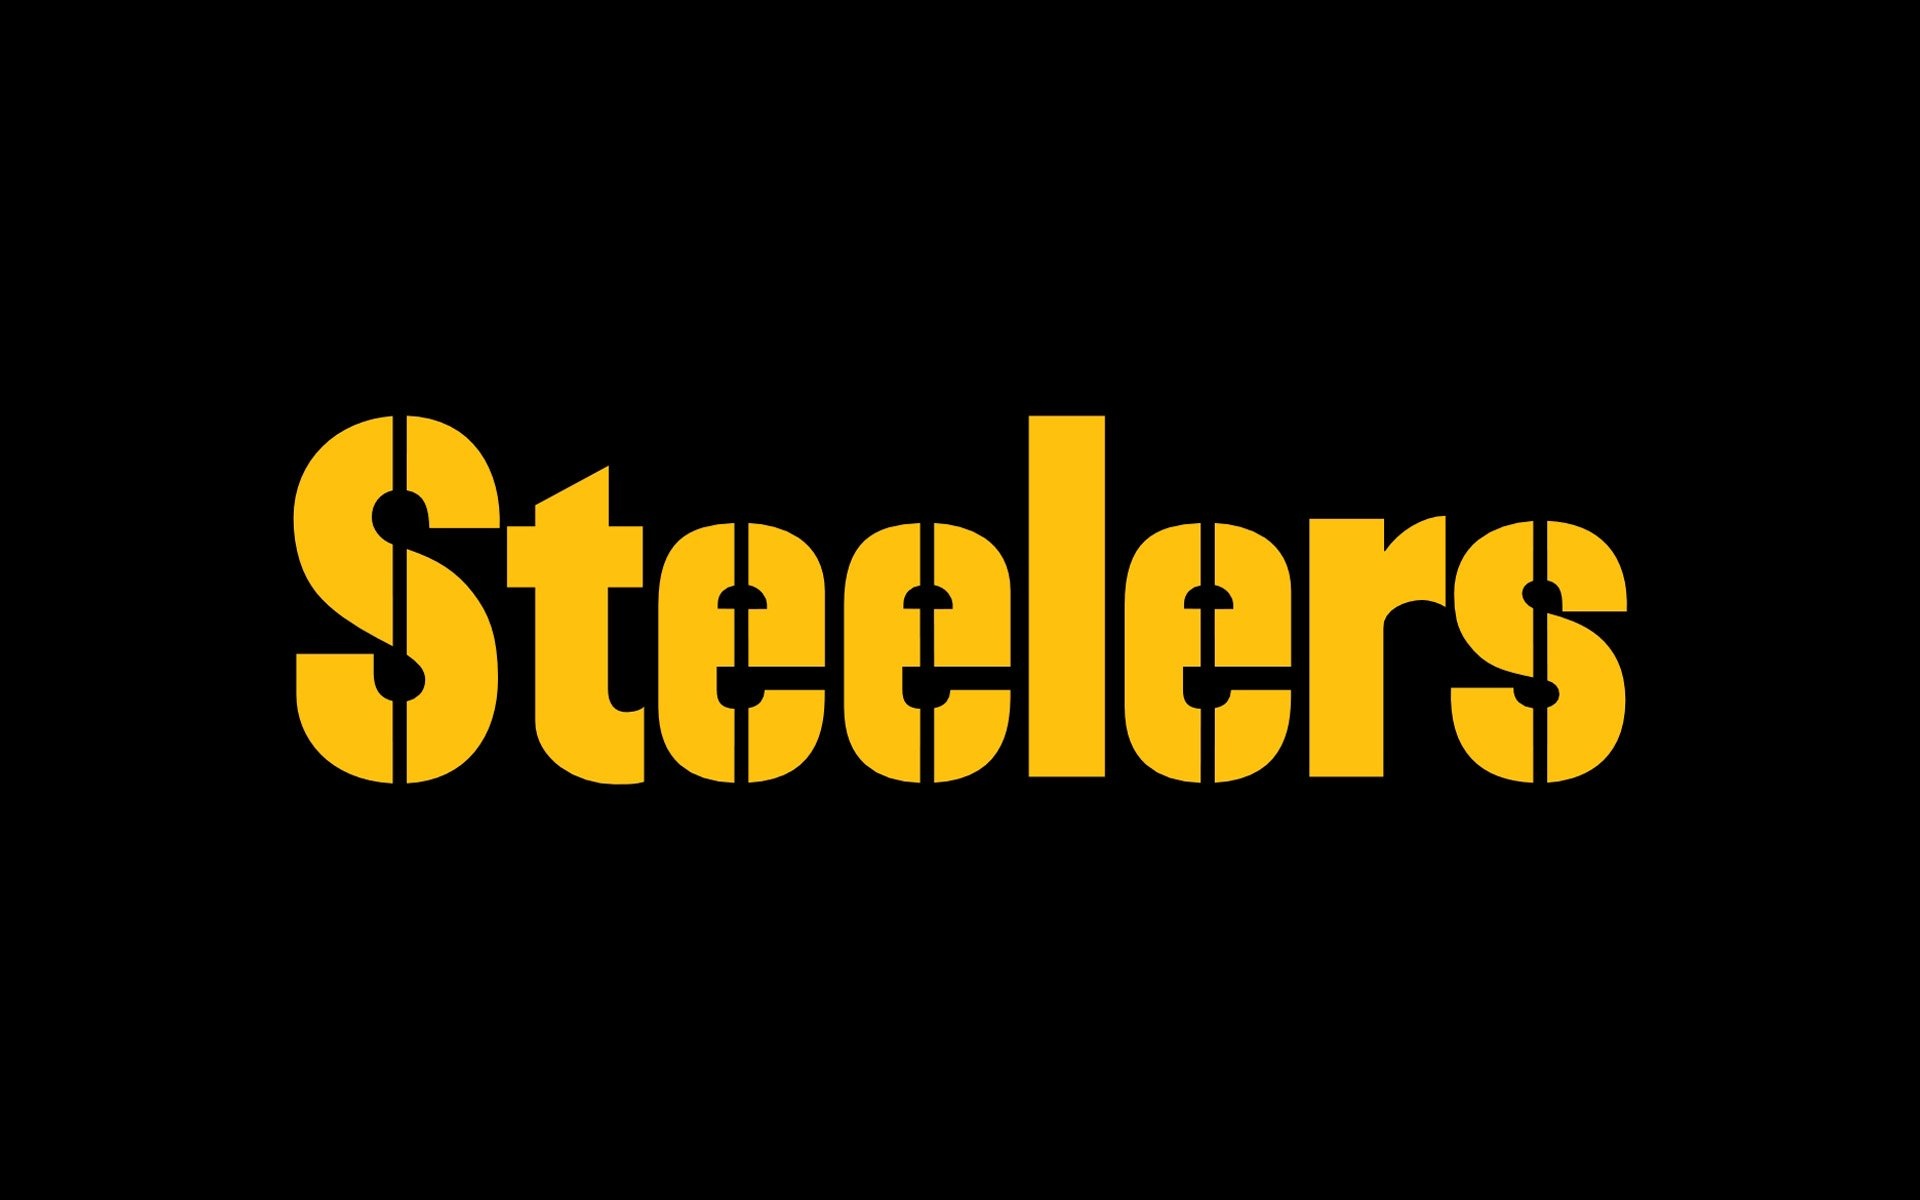 High-definition imagery, Team insignia, Bold sports design, Graphic elements, Steelers fans, 1920x1200 HD Desktop